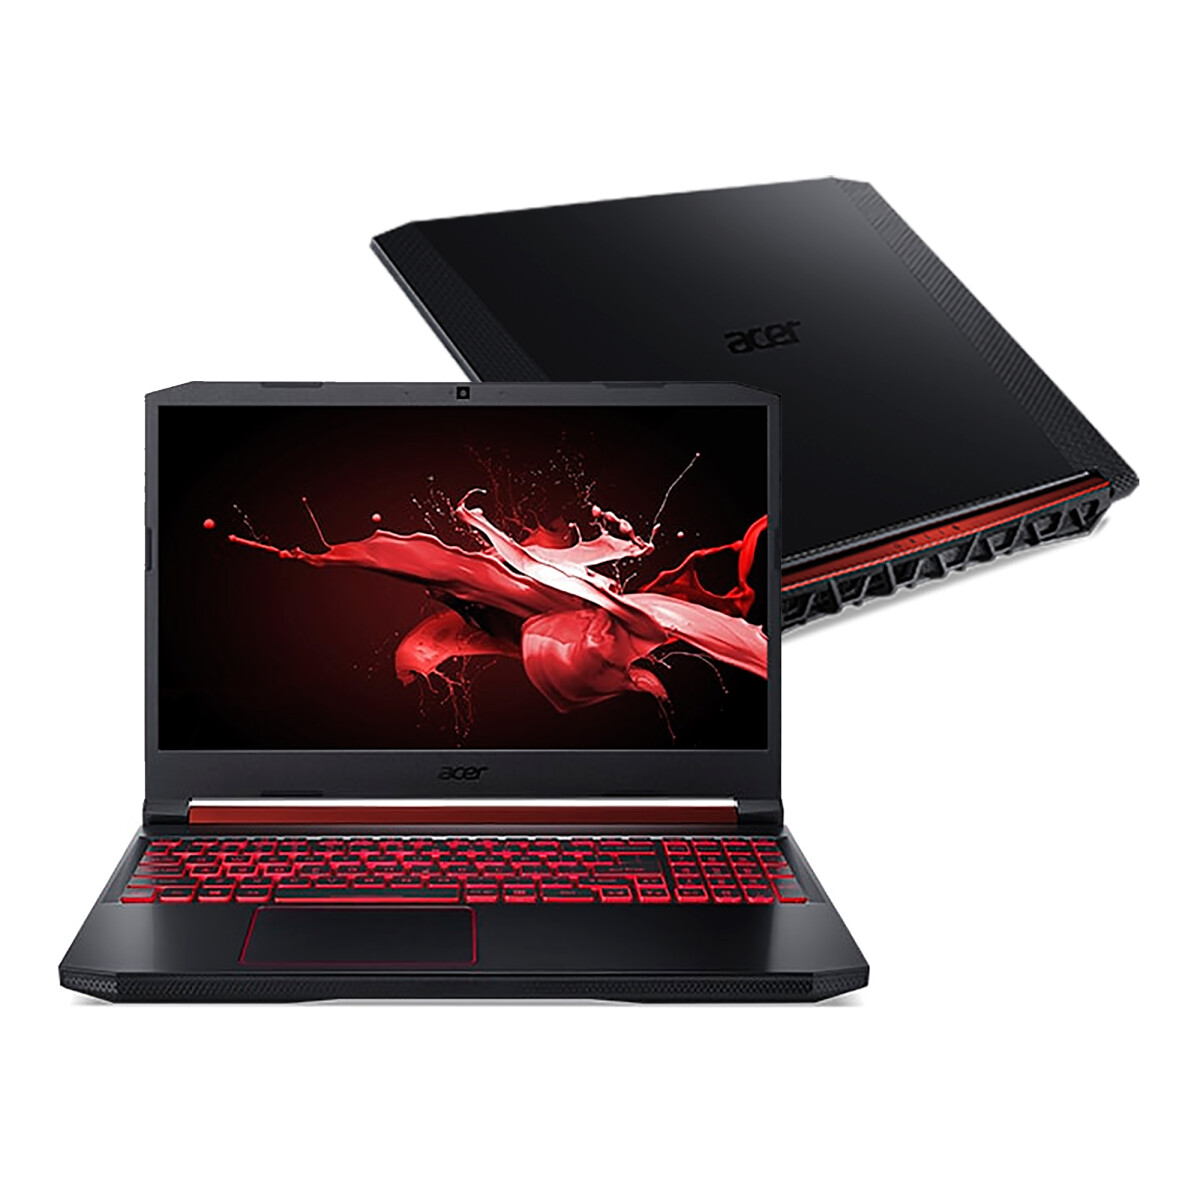 Acer - Notebook Gaming Nitro 5 AN515-54-5812 - 15,6" Ips Led. Intel Core I5 9300H. Intel Hd 630. Nvi - 001 